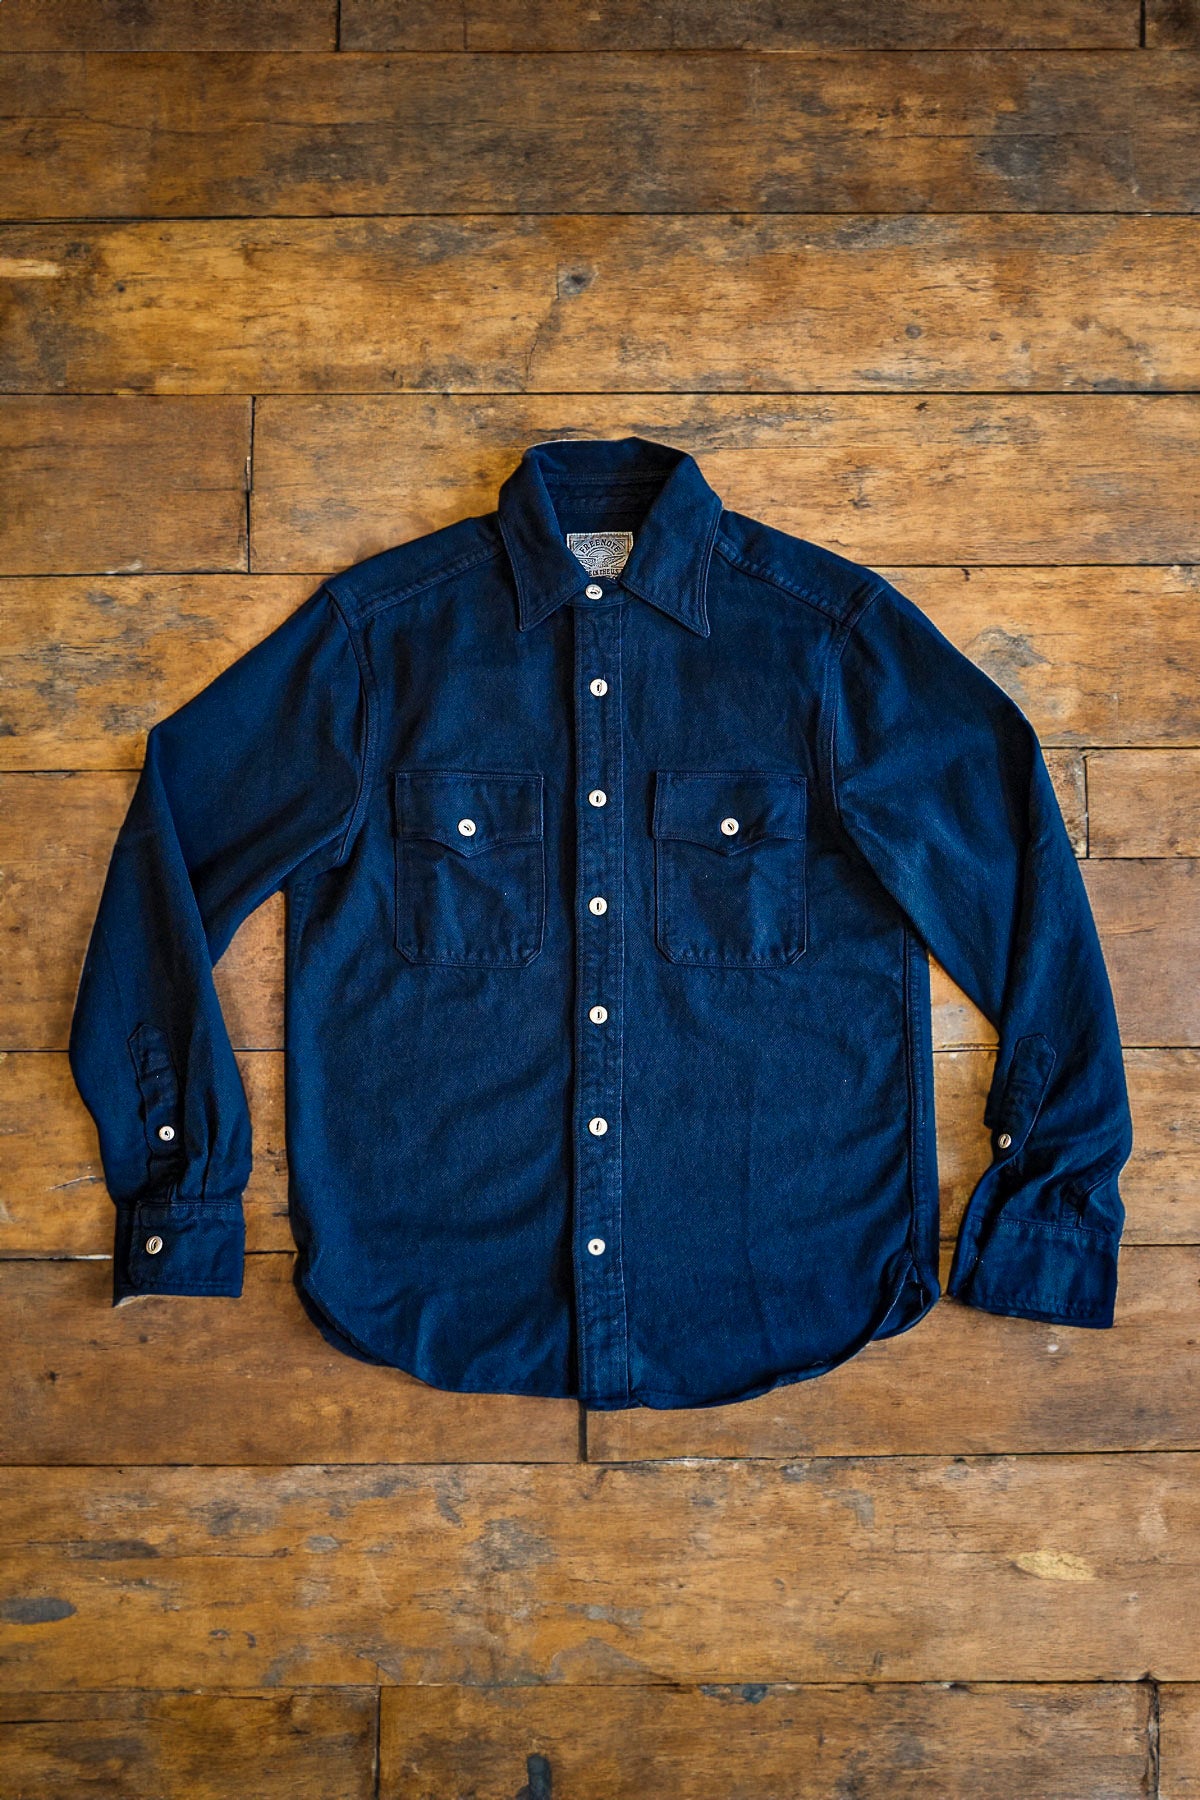 Freenote Cloth - Scout USA Shirt in Mineral Blue